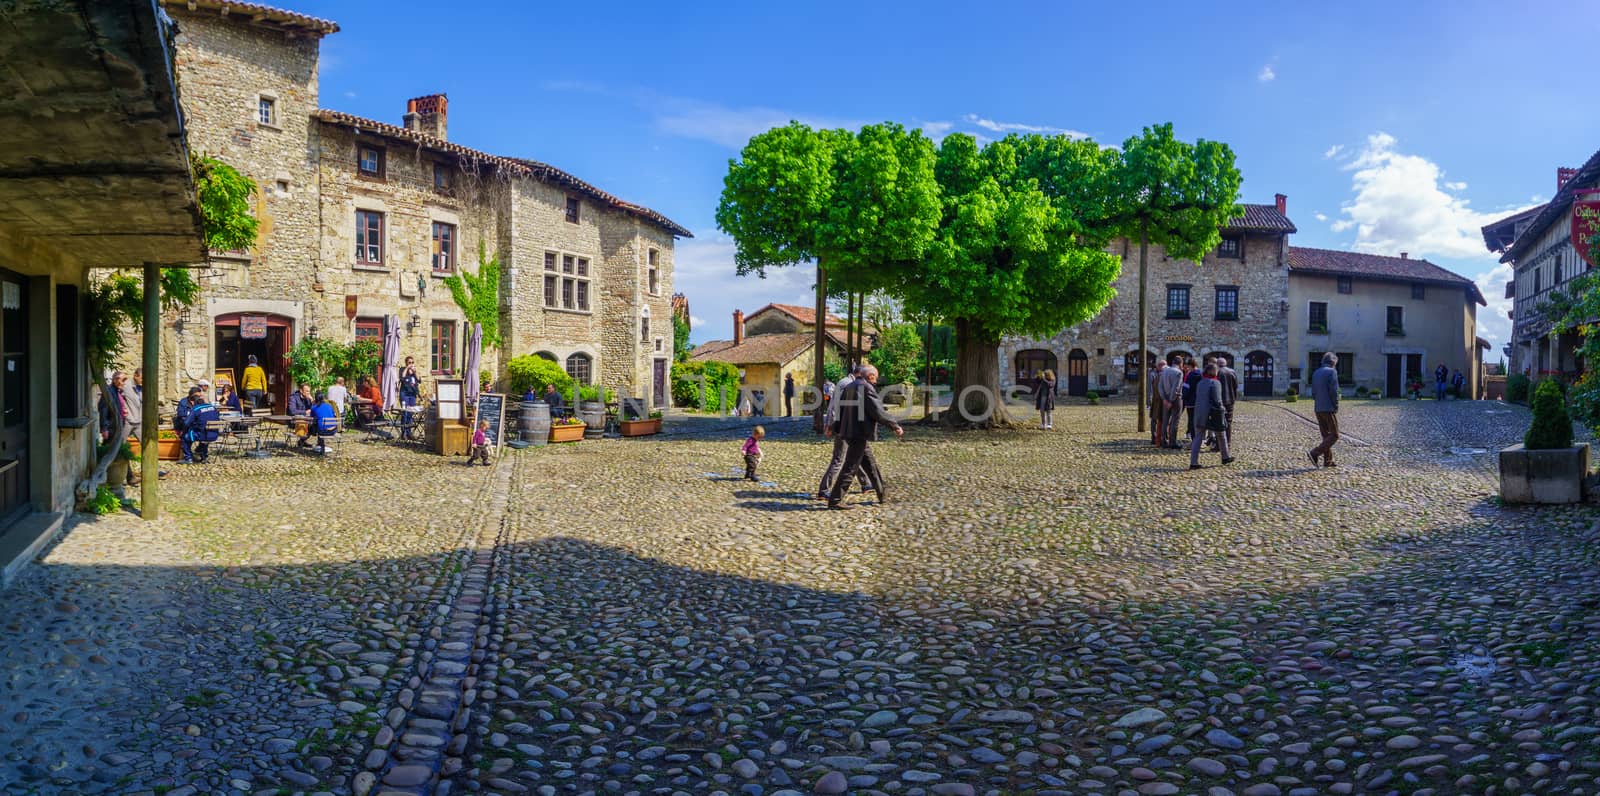 Scene of the main square, in the medieval village Perouges by RnDmS